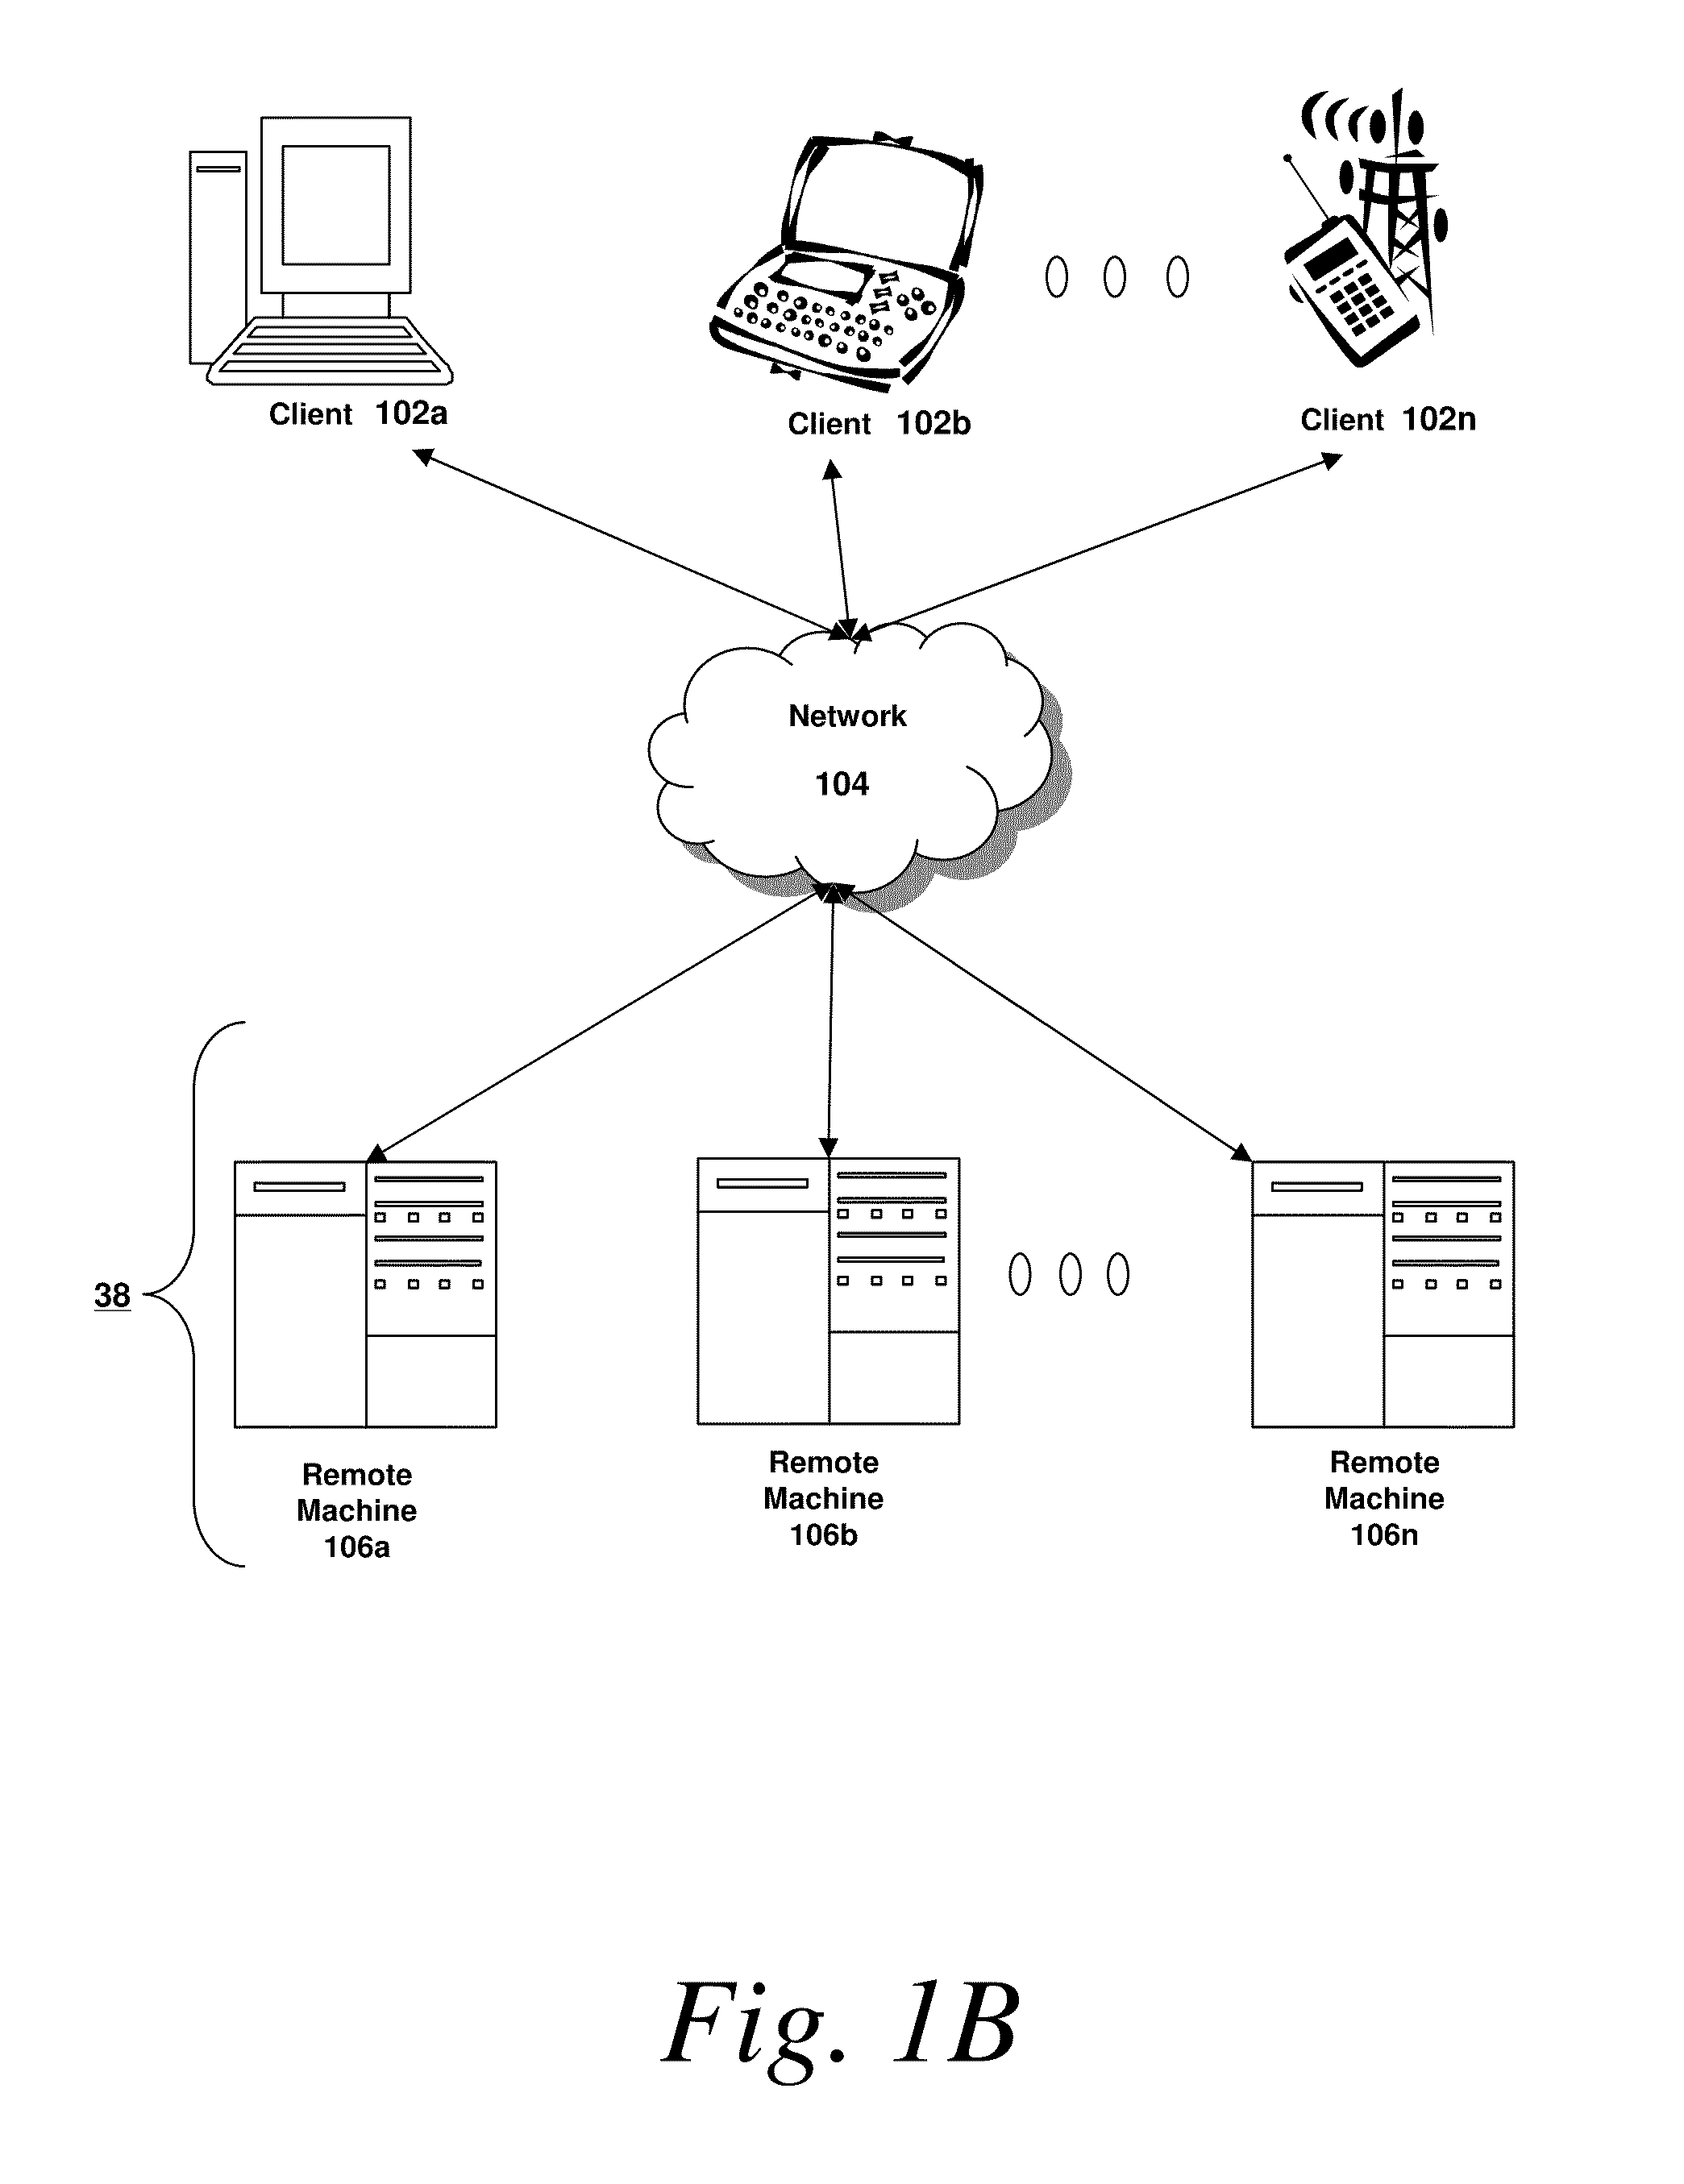 Methods and Systems for Monitoring, Controlling, and Recording Performance of a Storm Water Runoff Network